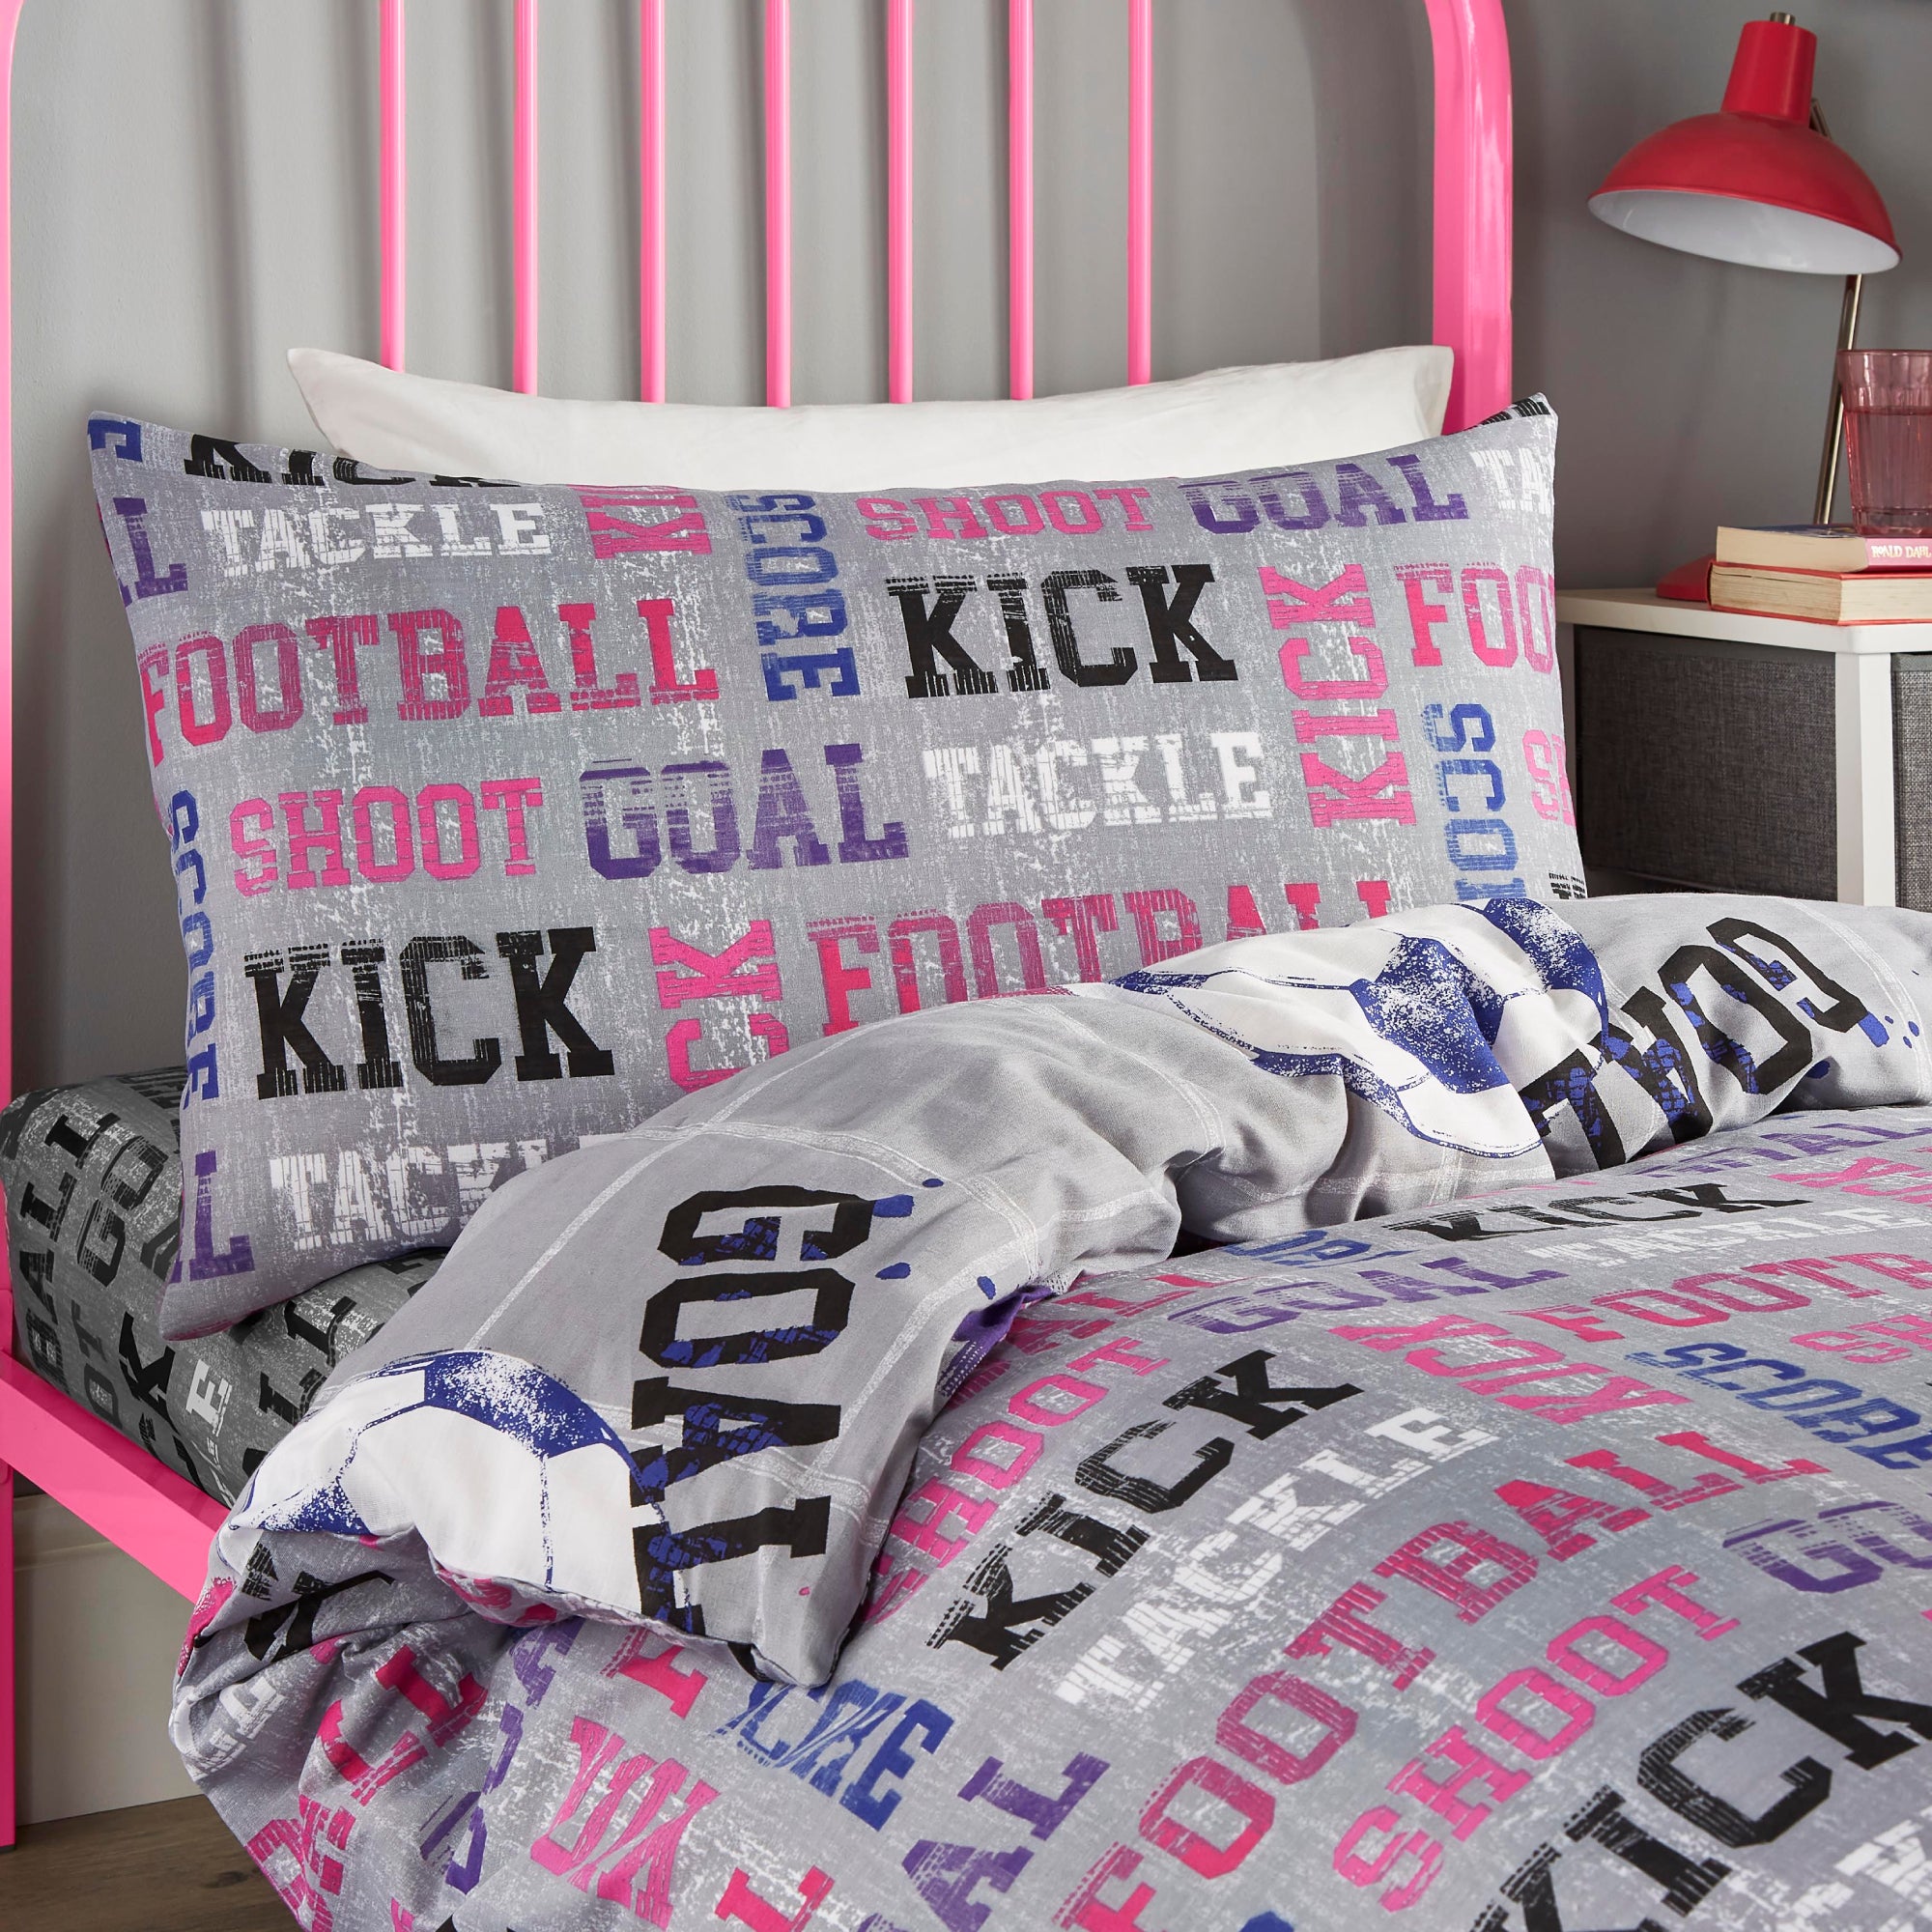 Duvet Cover Set Football by Bedlam in Pink